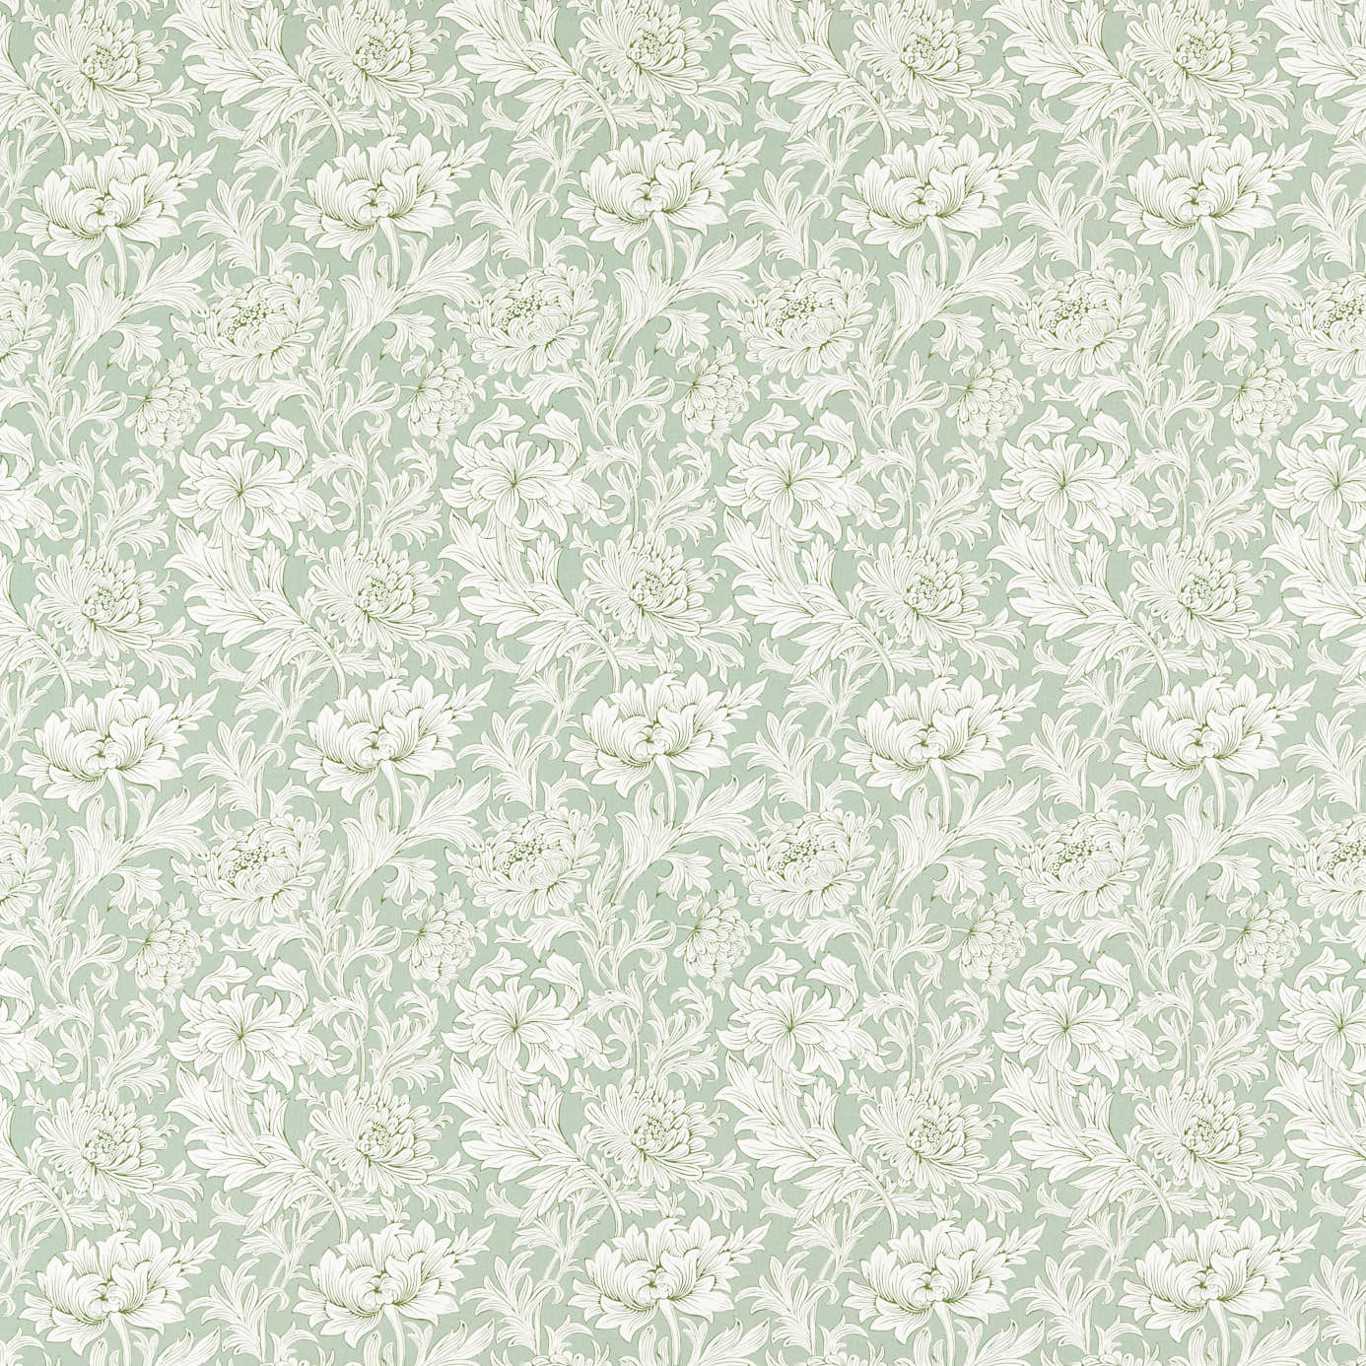 Chrysanthemum Toile Willow Fabric by MOR